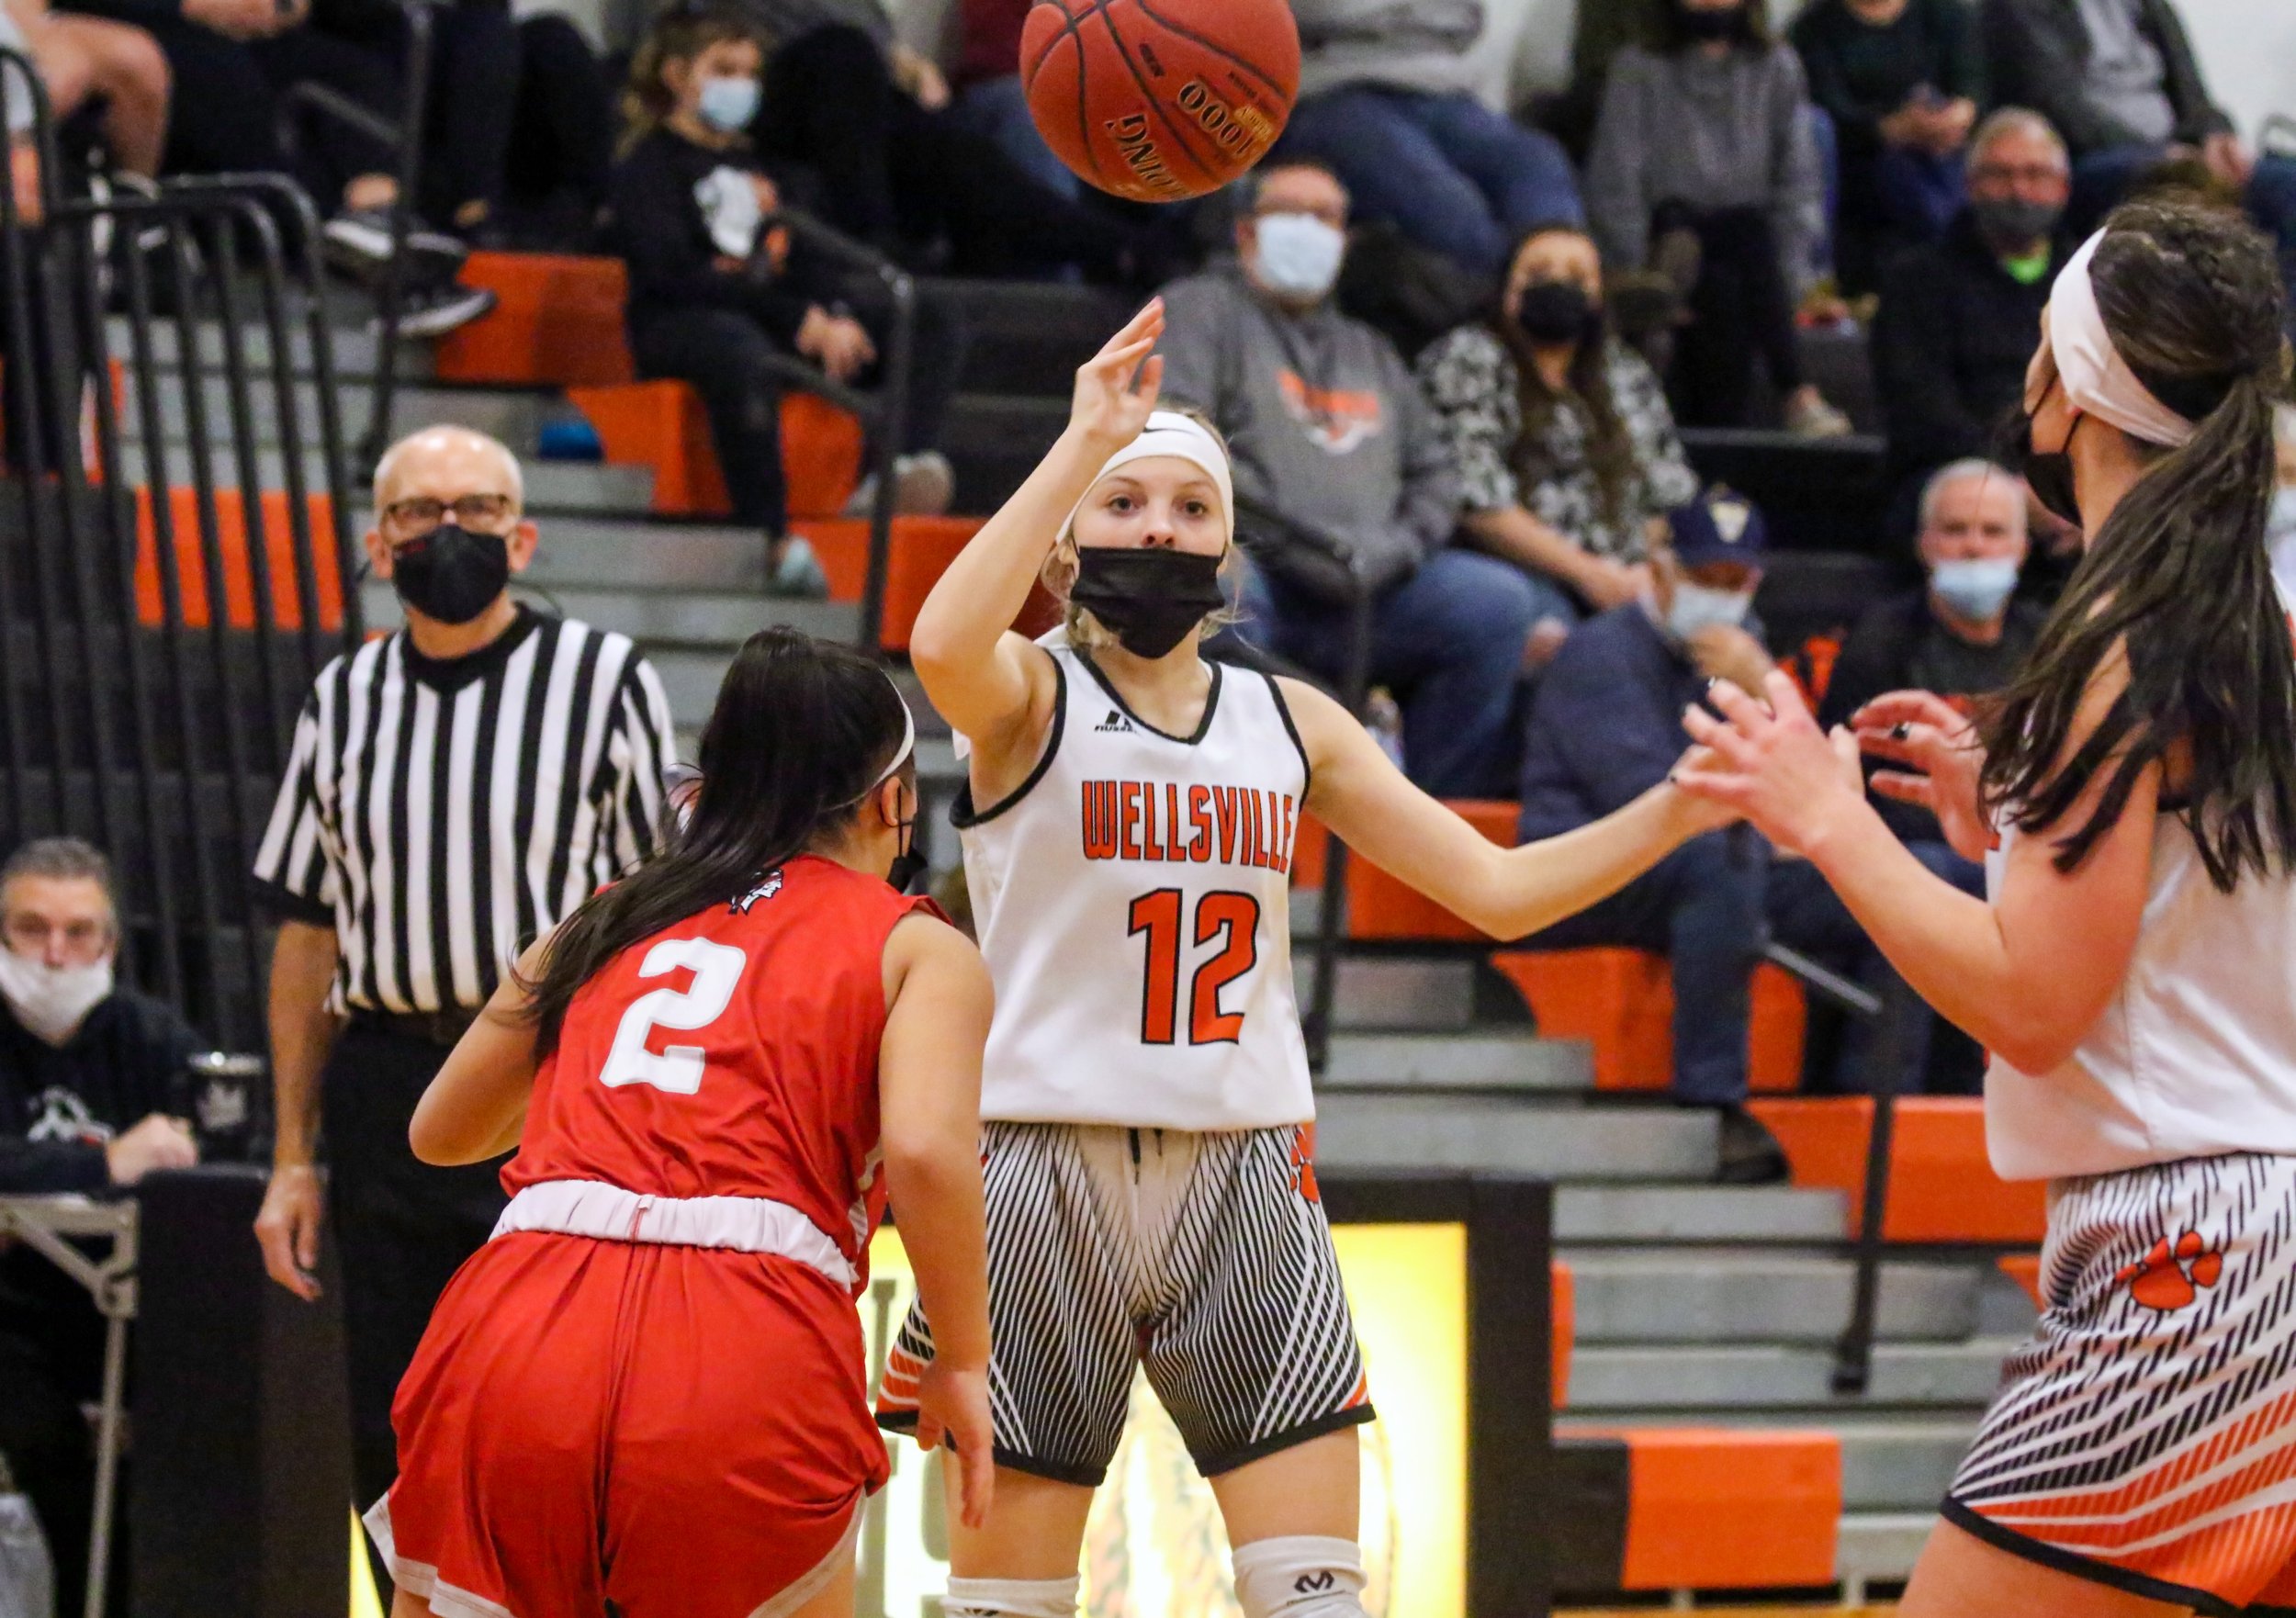  Wellsville senior Emily Costello (12) provides a pass to a streaking Kaylee Coleman, far right, on her way to the basket during Saturday night’s home contest against Letchworth. [Chris Brooks/WellsvilleSports.com] 